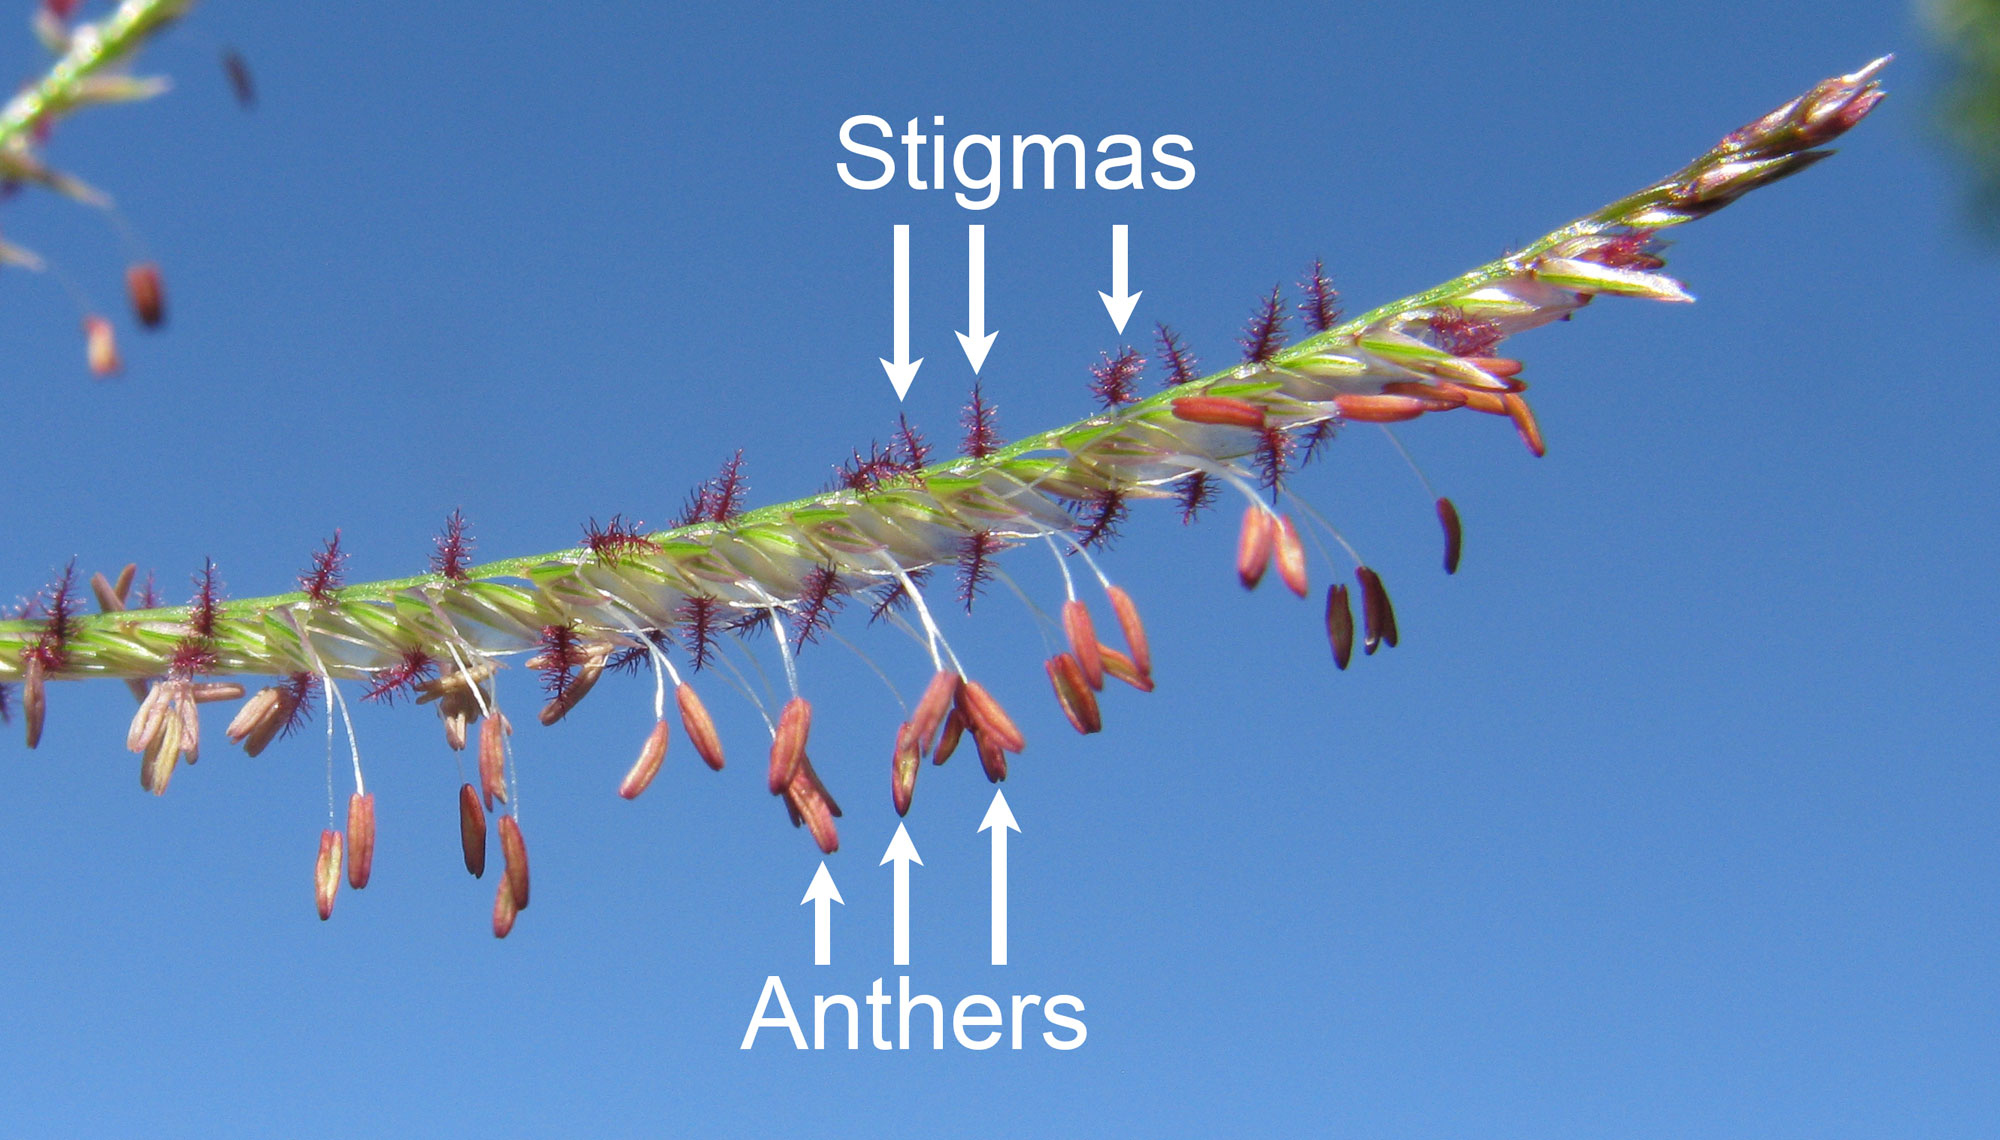 Photograph of an inflorescence of Bermuda grass. The photo shows an inflorescence branch oriented roughly horizontally, with its tip to the right. Feathery purple stigmas and pinkish anthers attached to white thread-like filaments protrude from the inflorescence. Some of the stigmas and anthers are labeled.